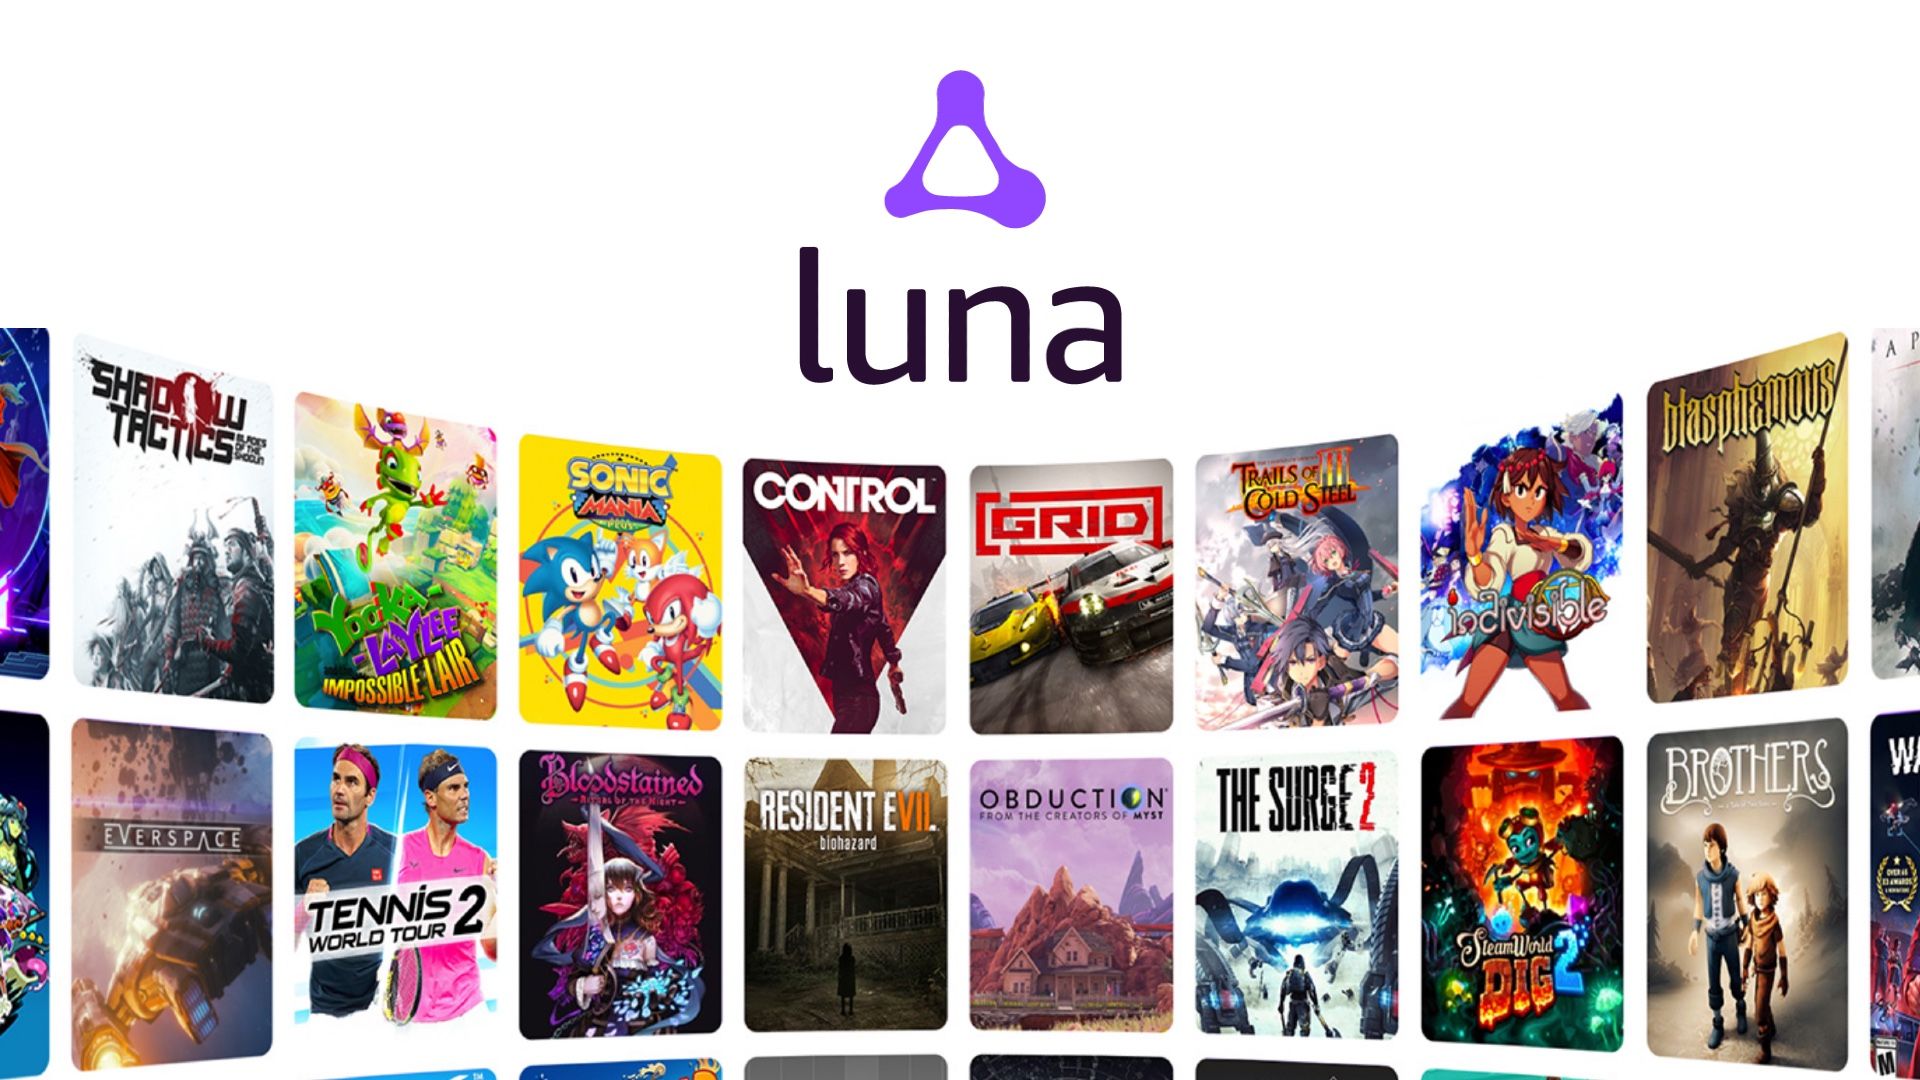 Amazon opens early accesses to Luna, Amazon's cloud gaming